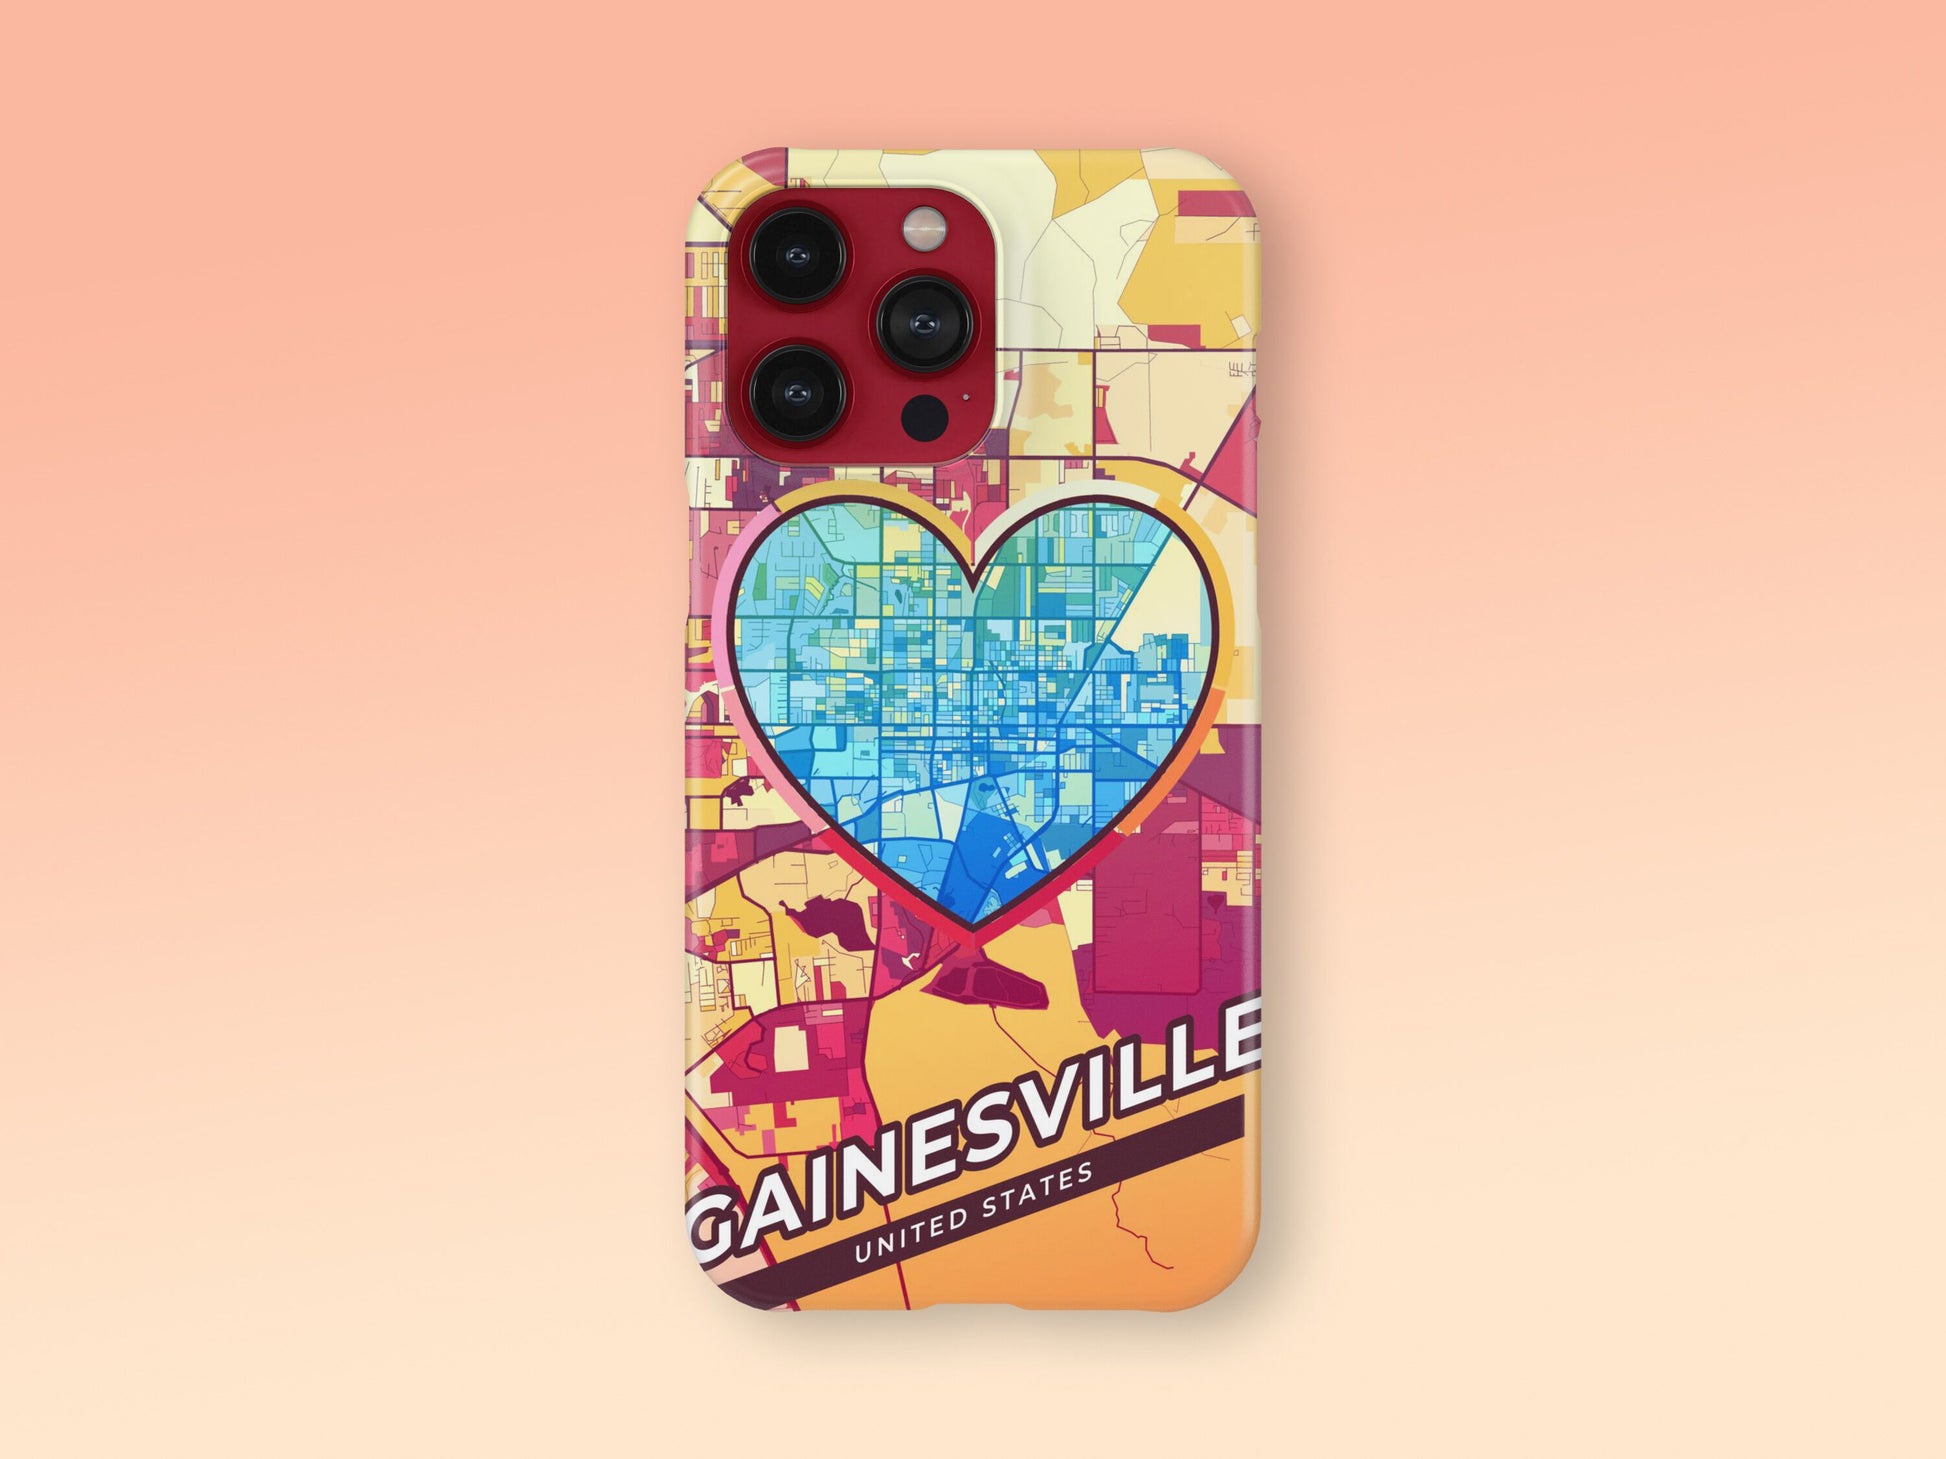 Gainesville Florida slim phone case with colorful icon. Birthday, wedding or housewarming gift. Couple match cases. 2